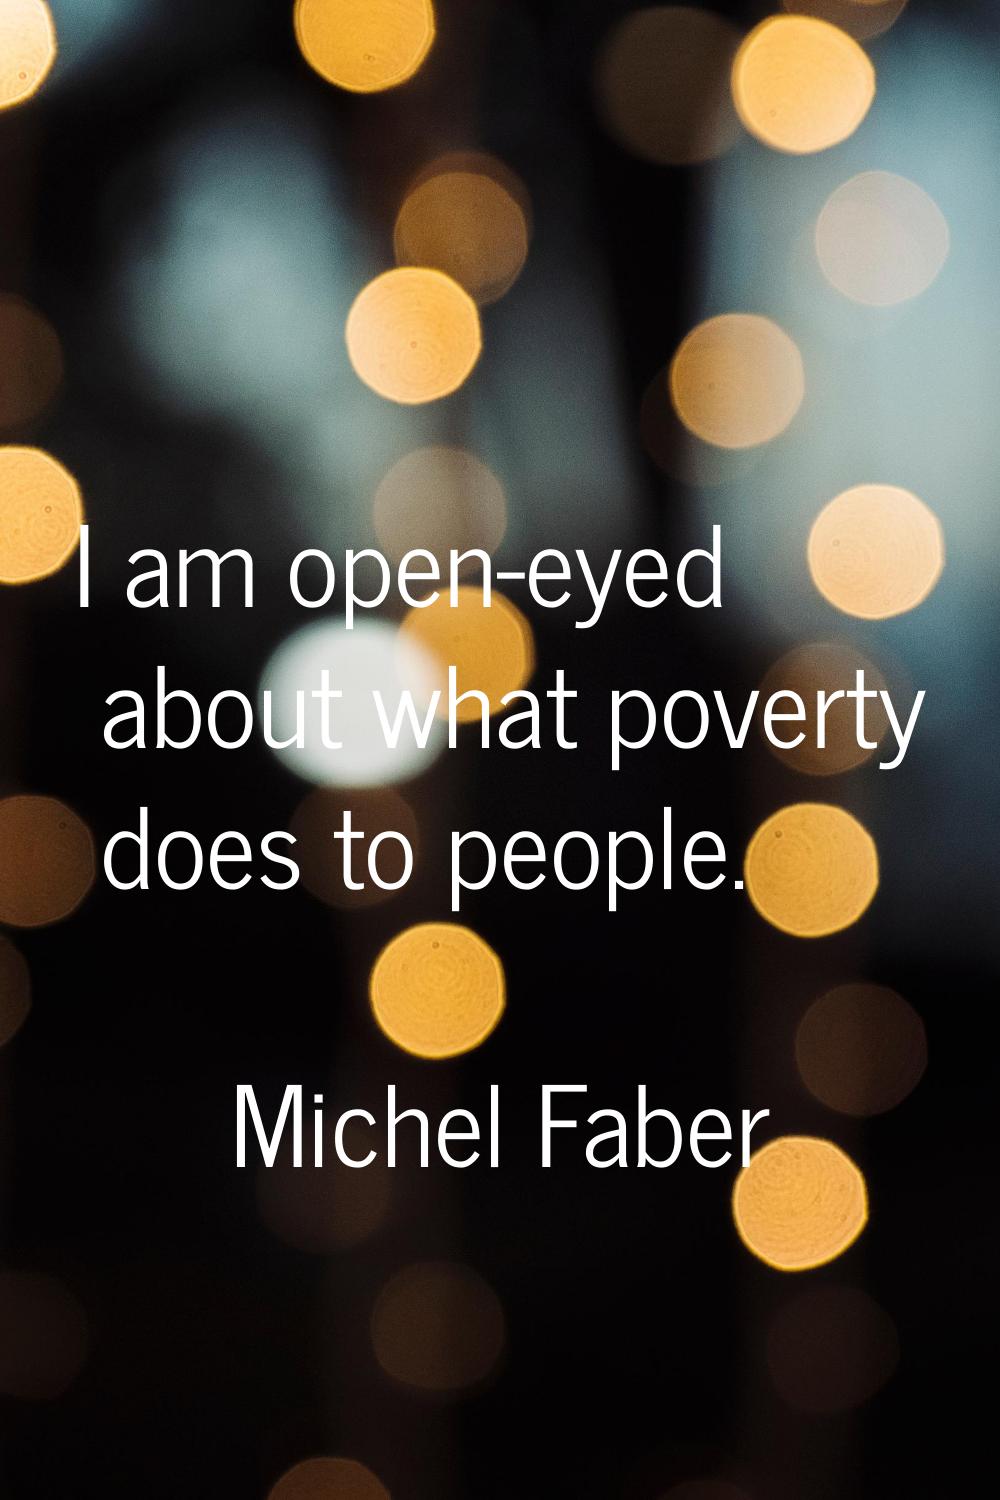 I am open-eyed about what poverty does to people.